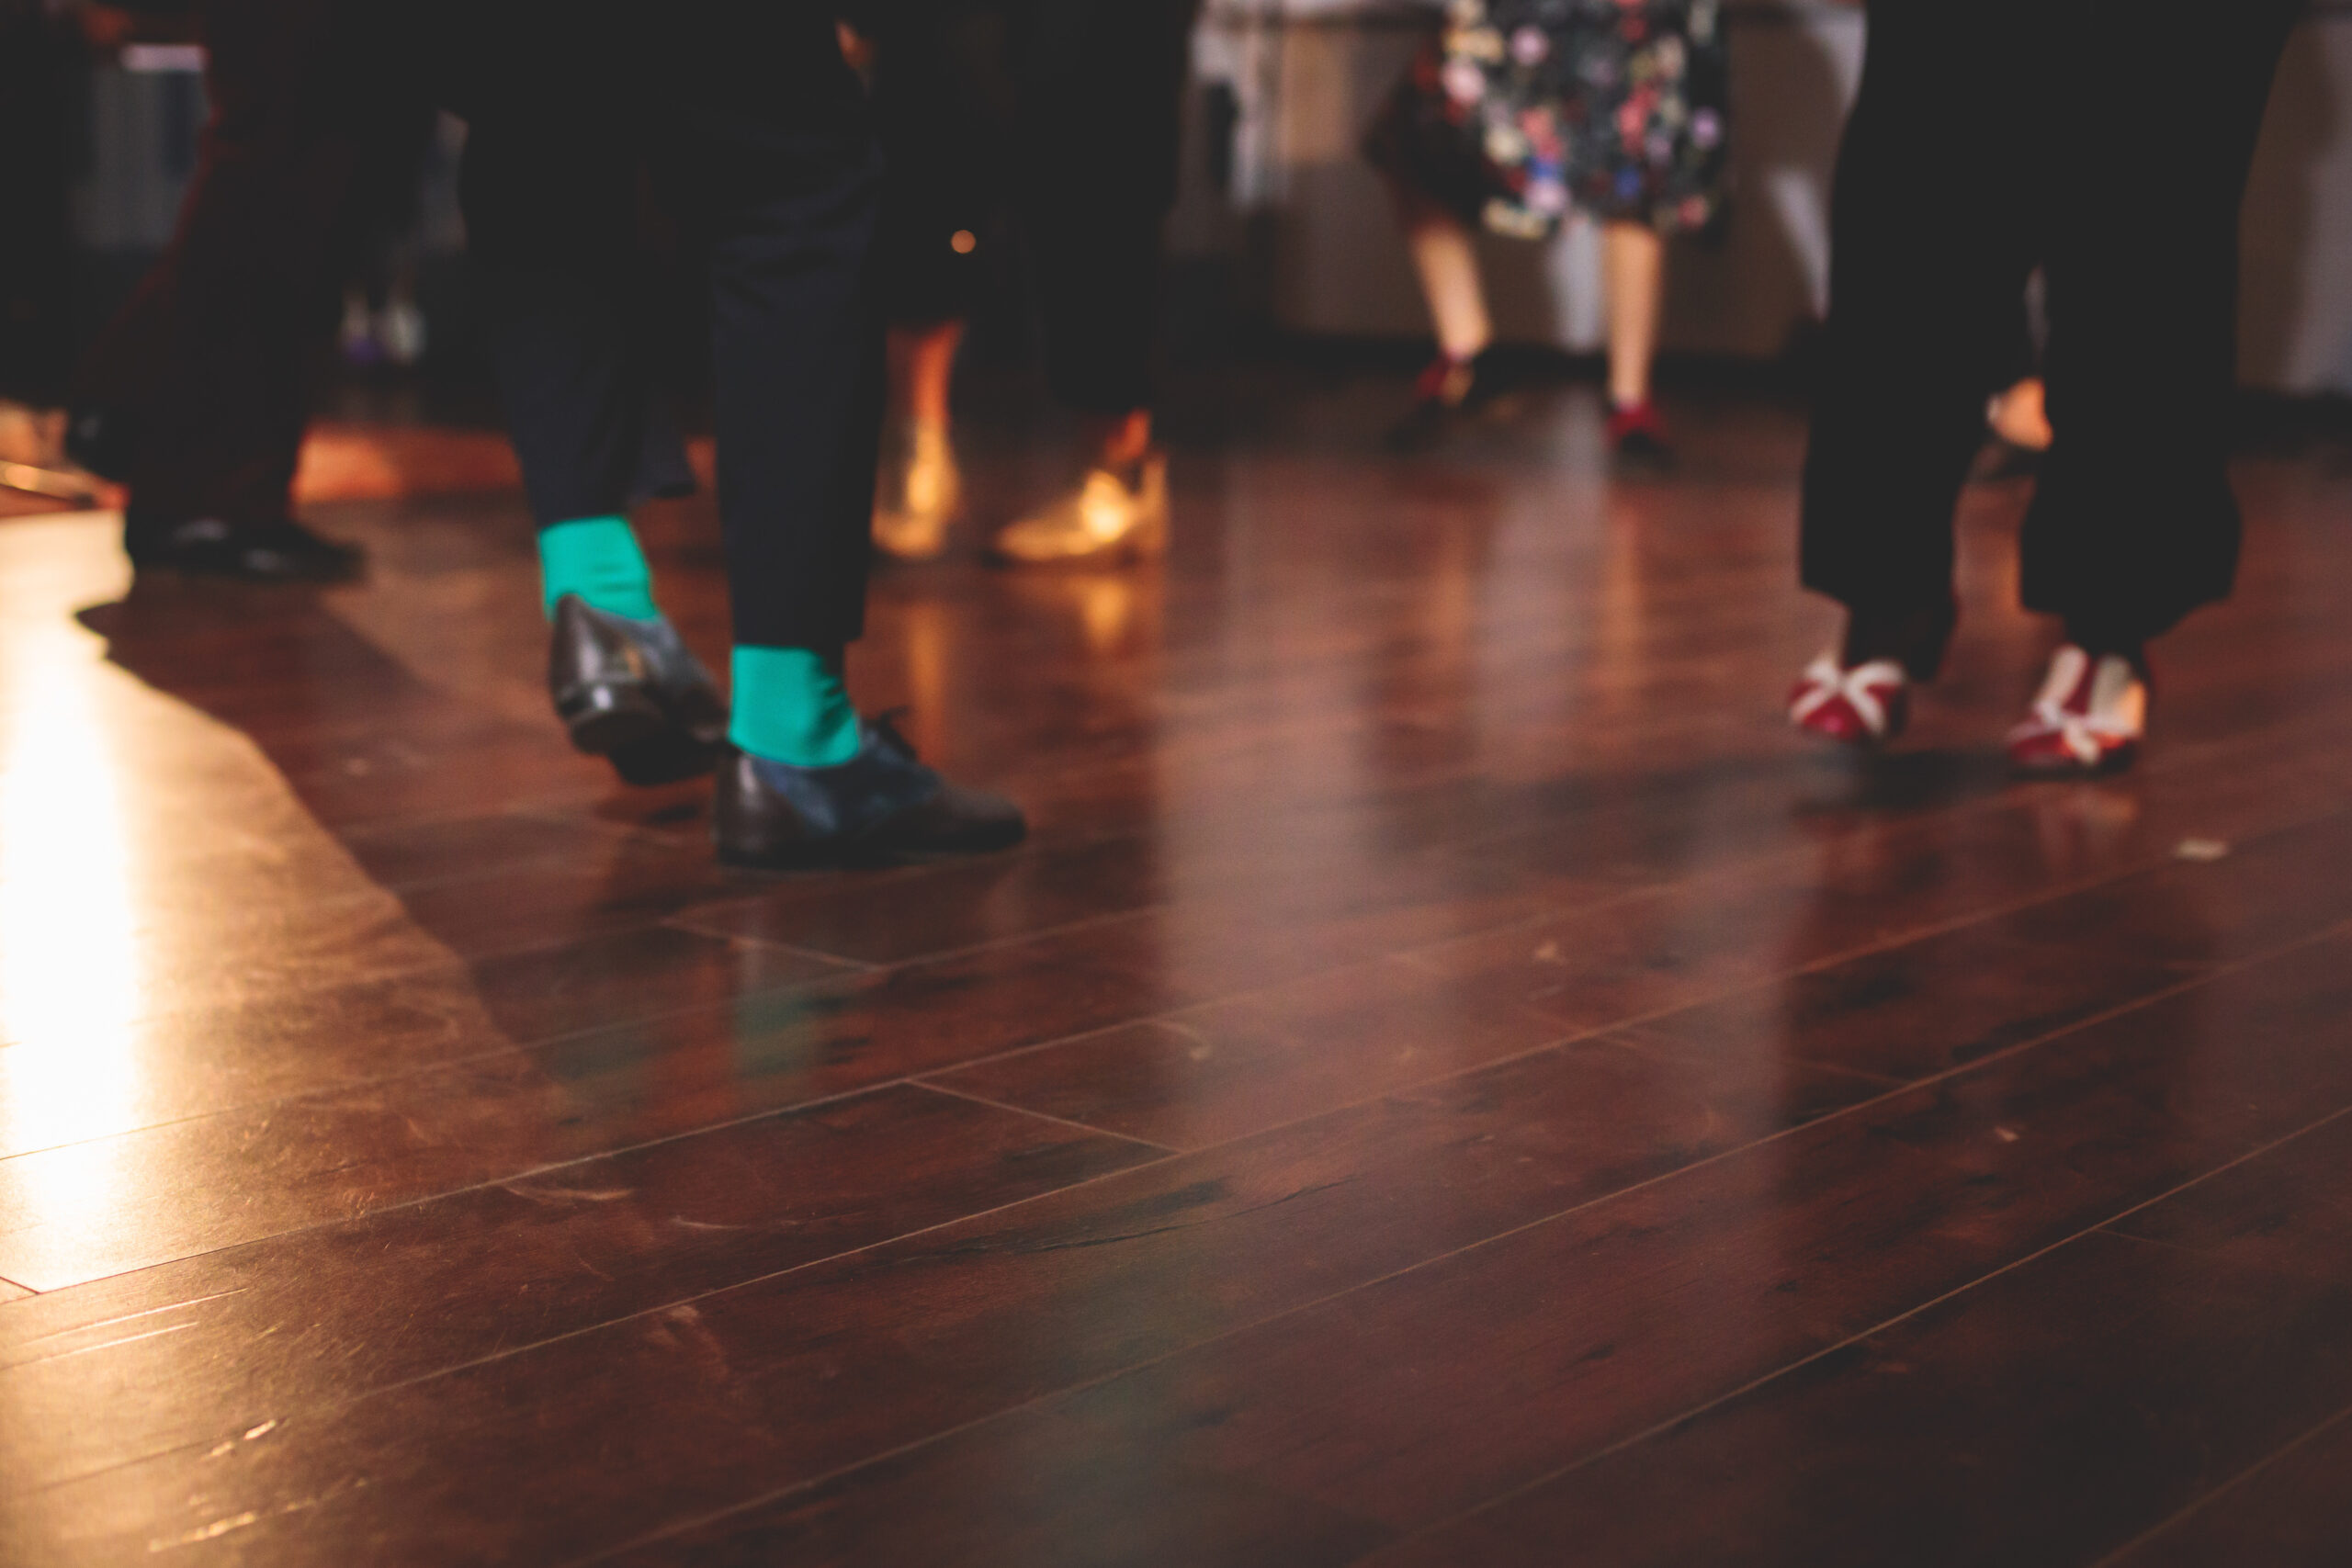 Dancing shoes of young couple dance retro jazz swing dances on a ballroom club wooden floor, close up view of a shoes, female and male, dance lessons class rehearsal